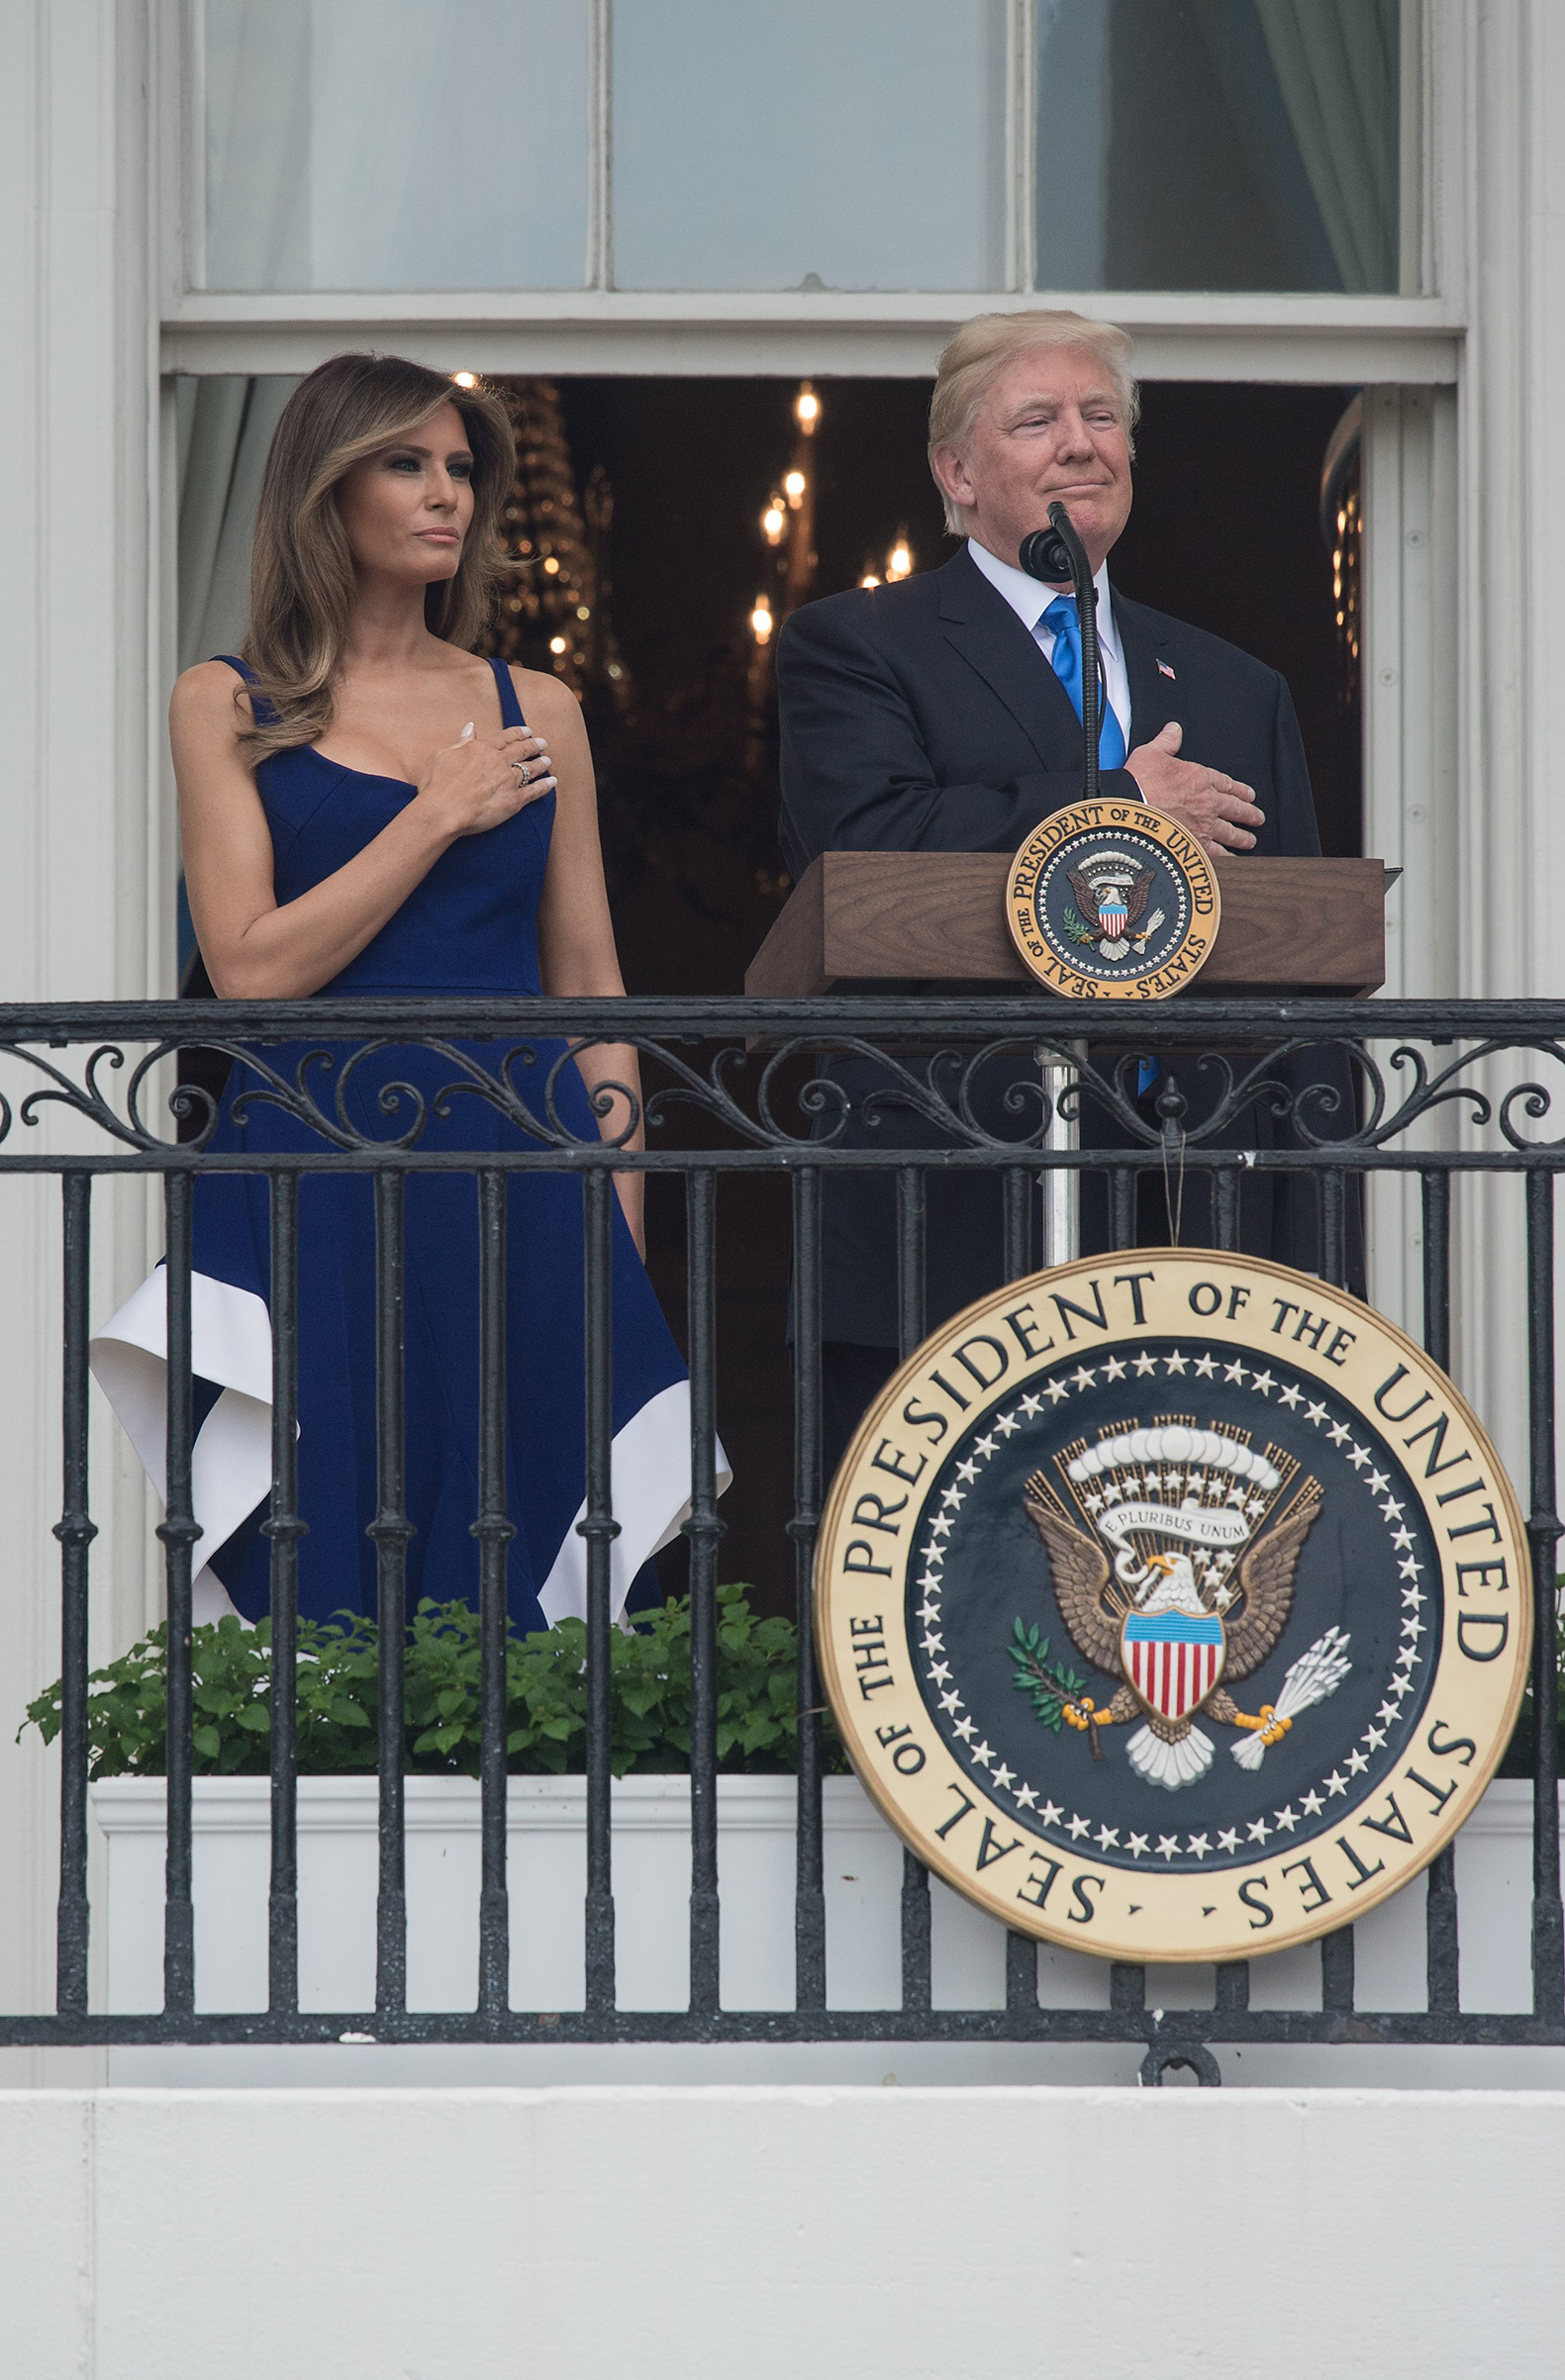 President Donald Trump and first lady Melania Trump, wearing a blue and white dress by designer Esteban Cortázar, listen to the national anthem during the military families picnic at the White House in Washington, DC, on July 4, 201